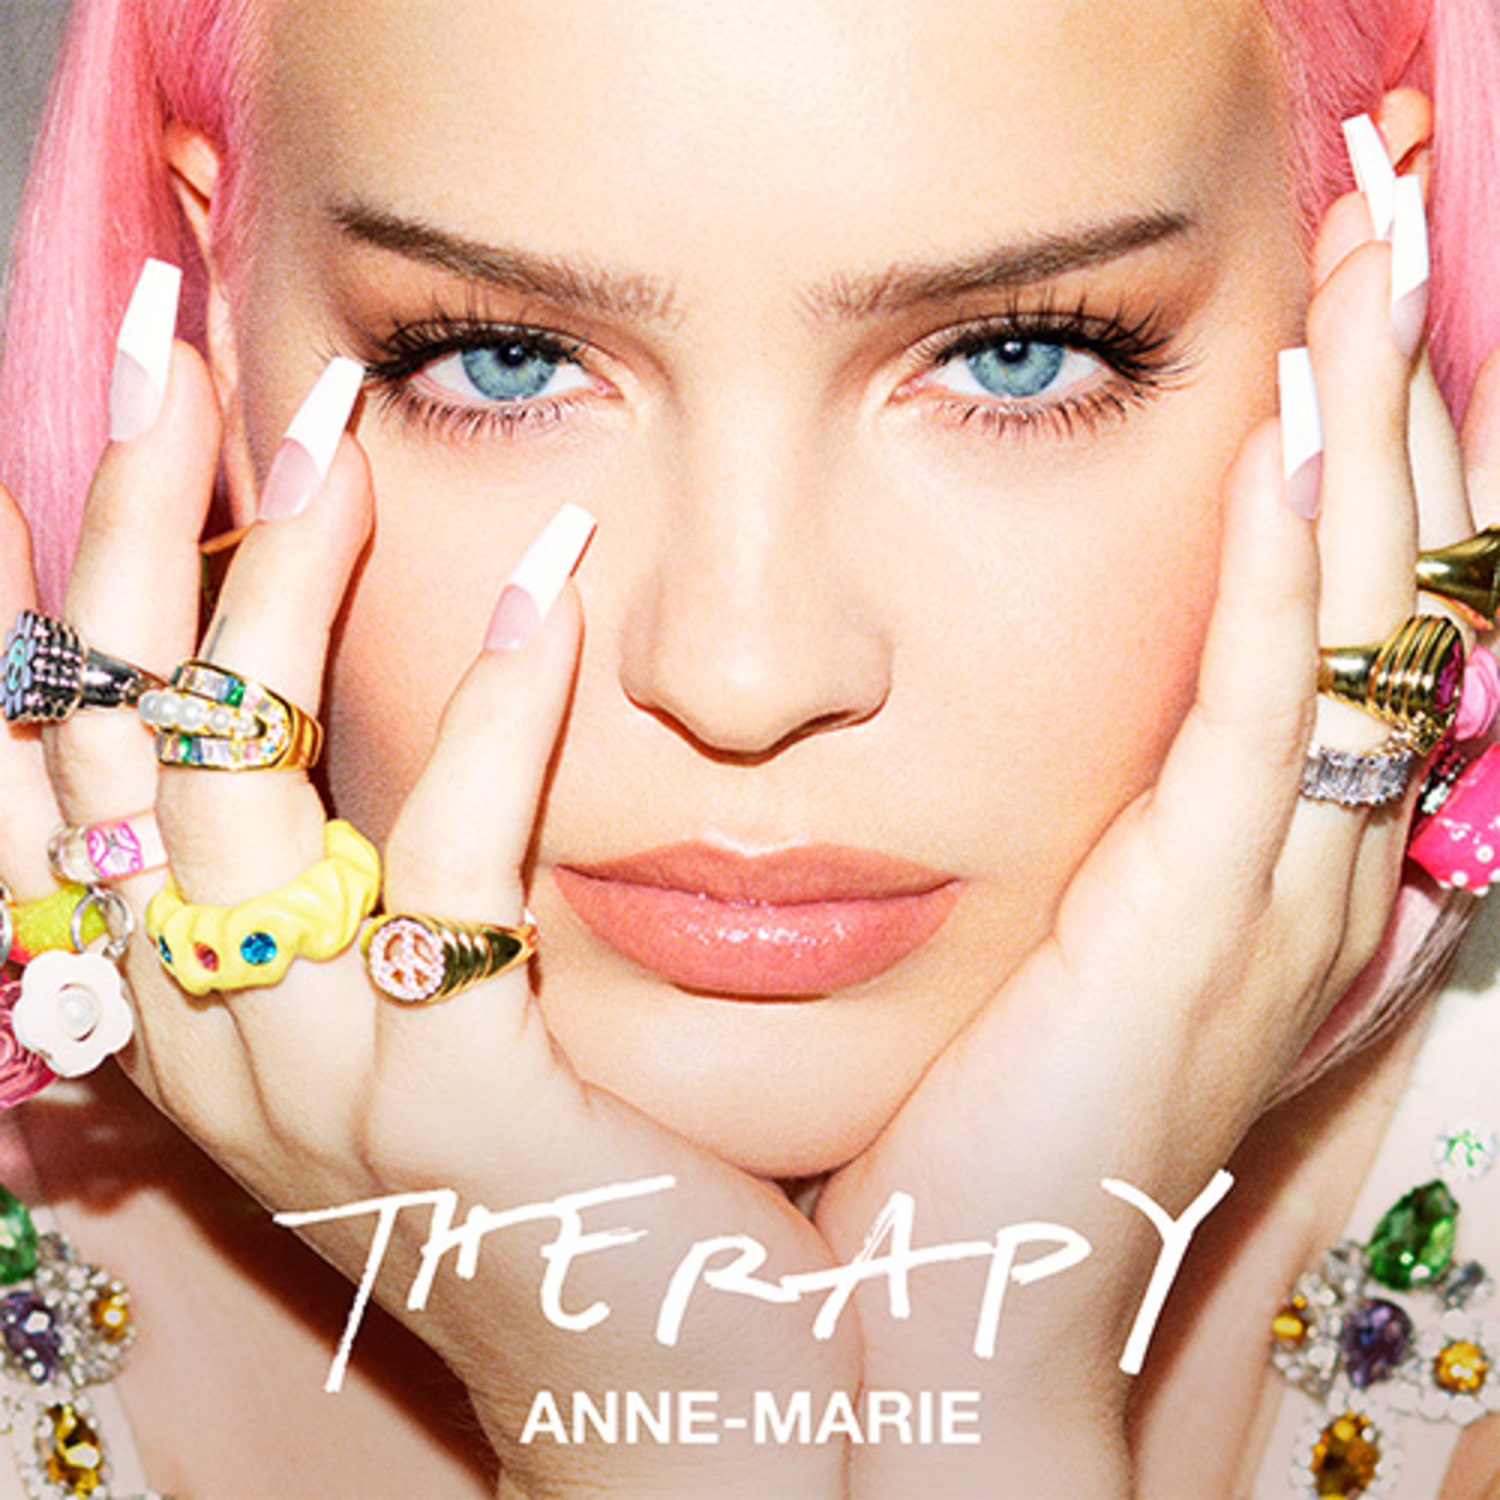 Anne-Marie - [Therapy] (수입반)